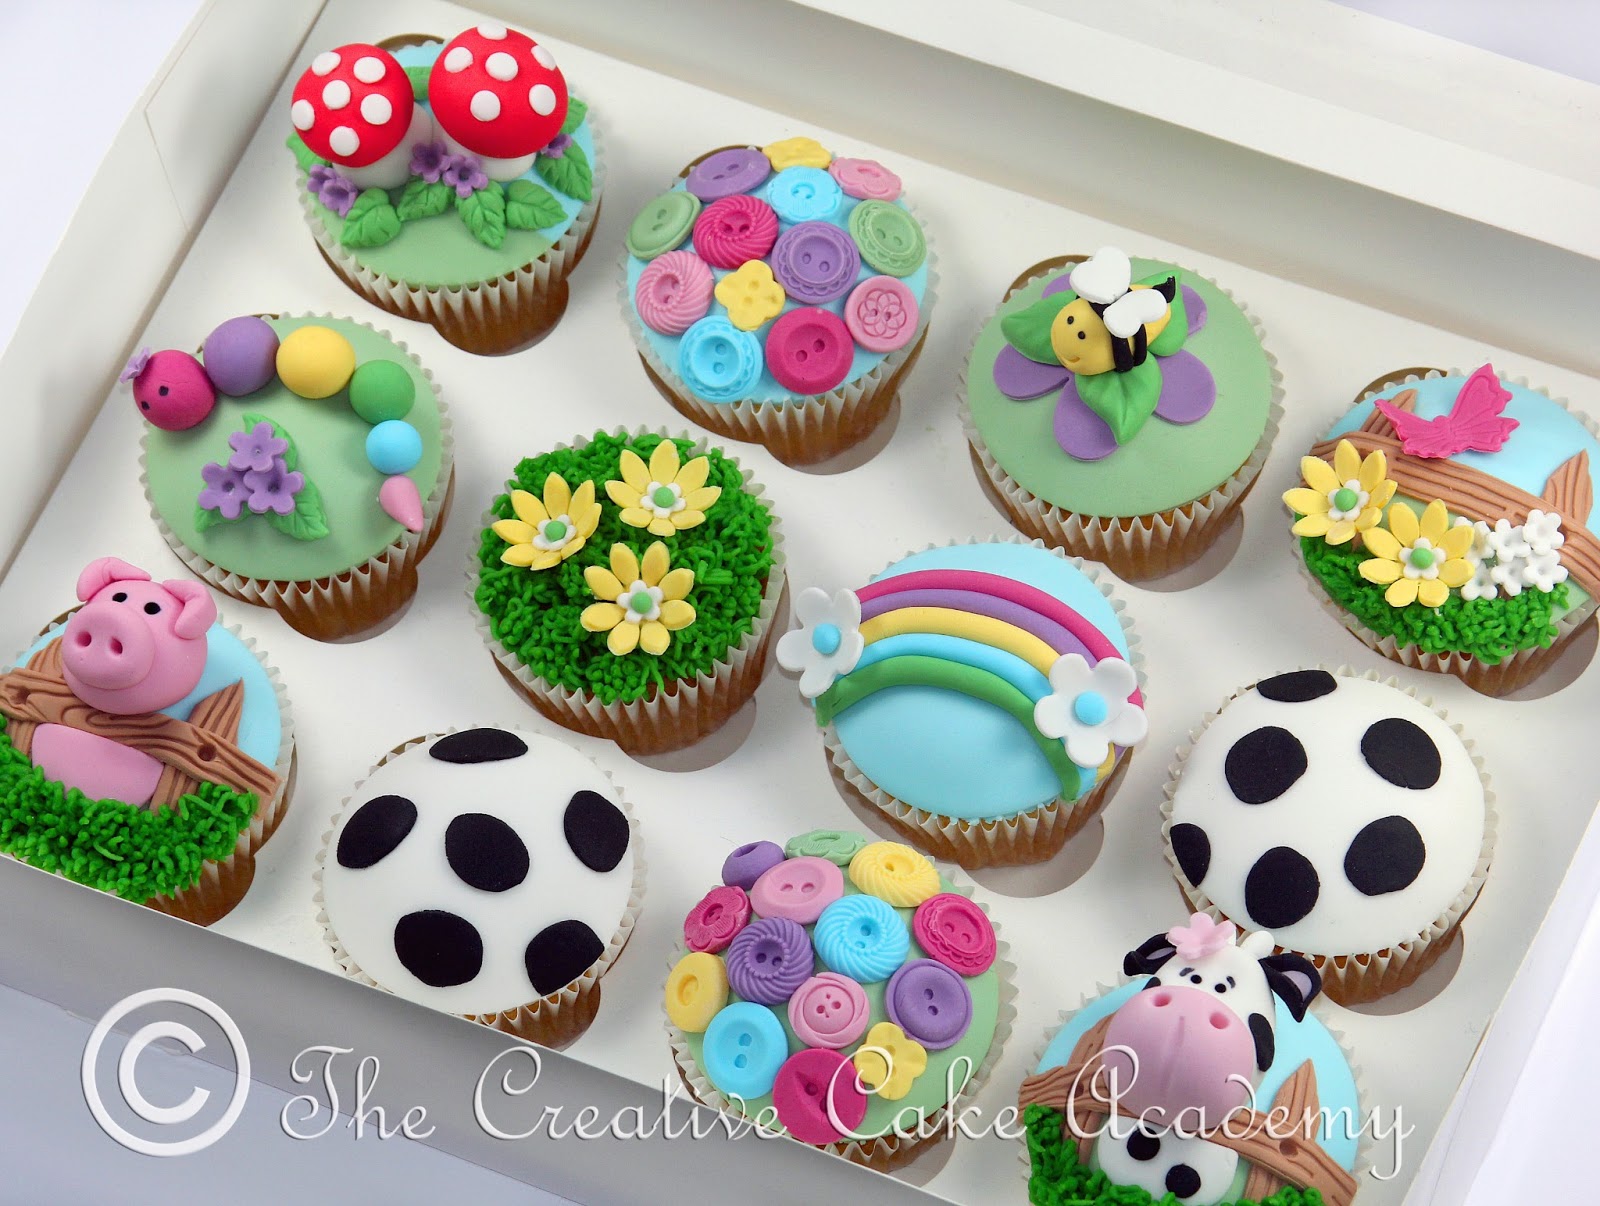 The Creative Cake Academy: CHILDREN'S PARTY CUPCAKES